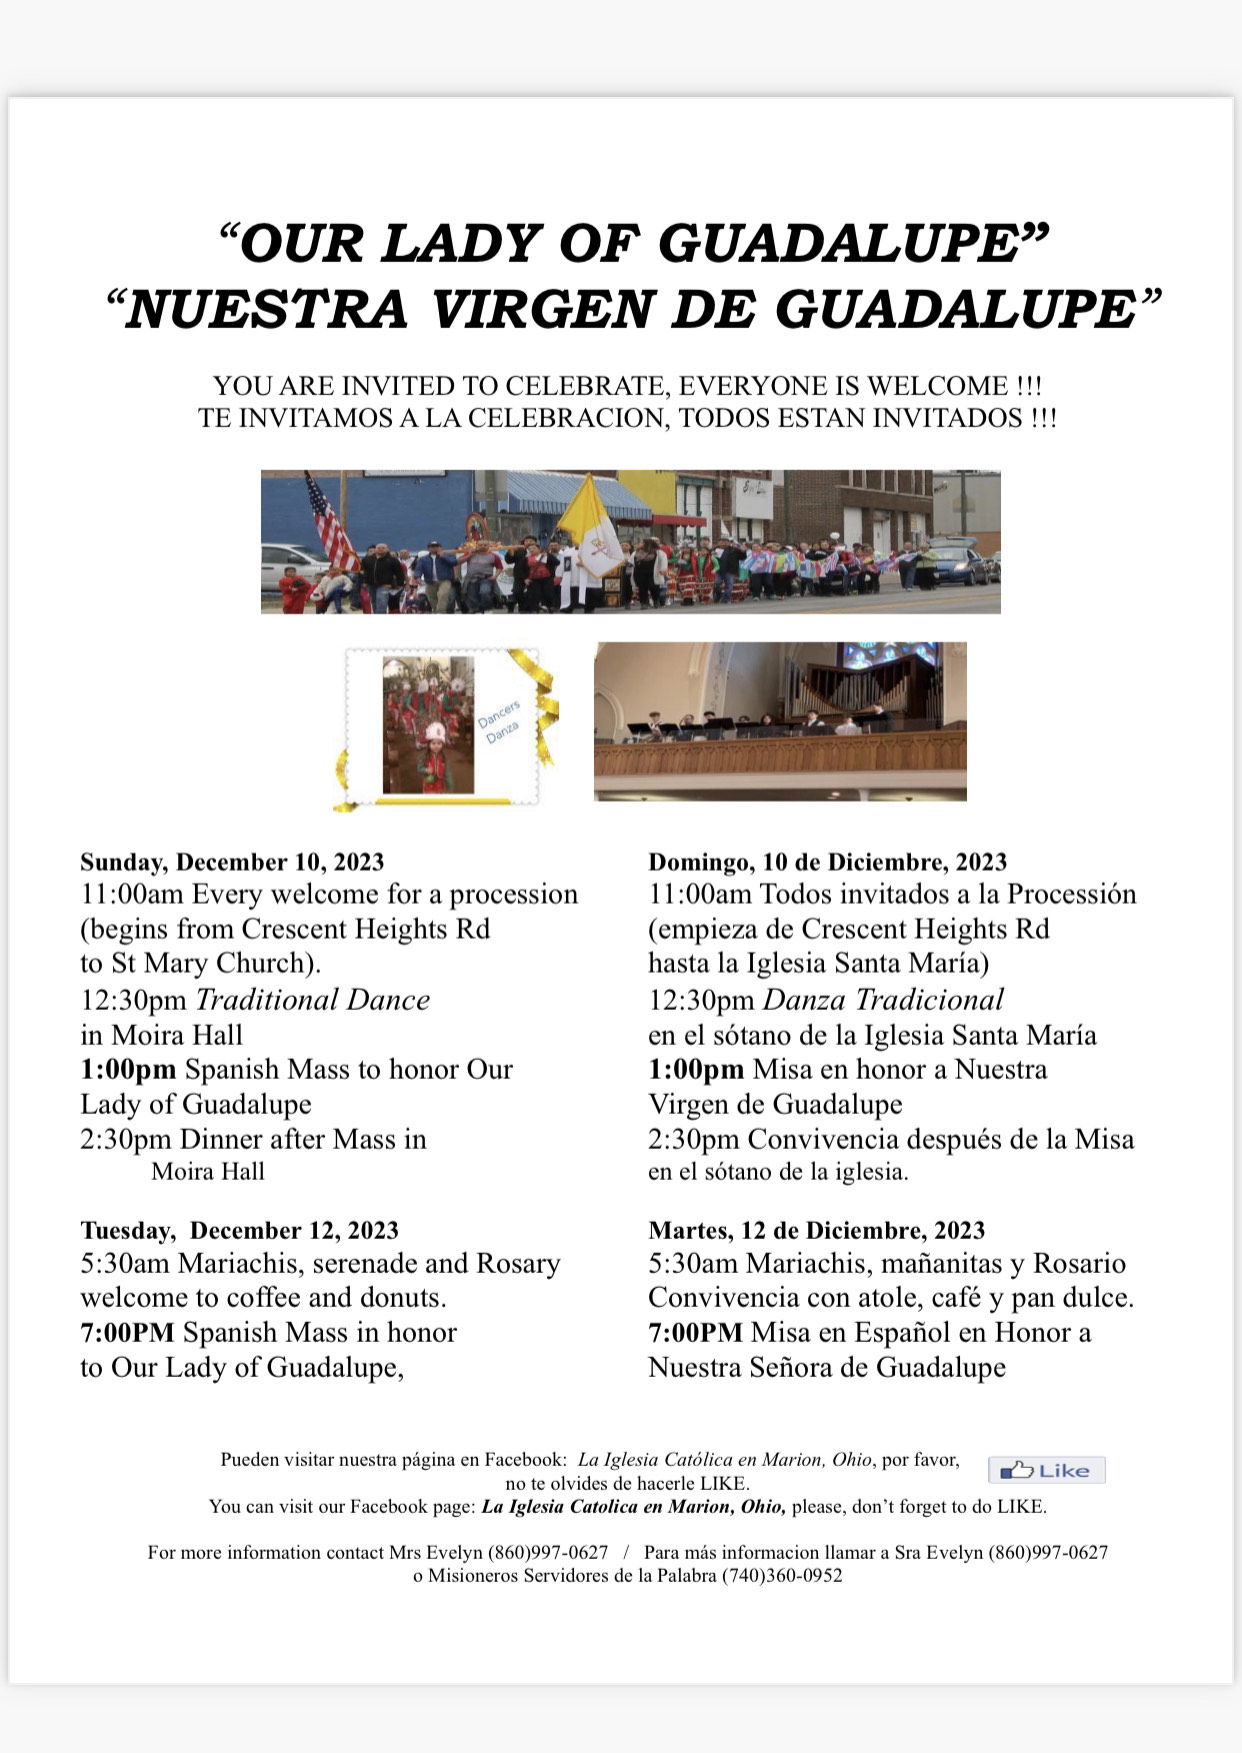 Our Lady of Guadalupe parade and church images with event schedule